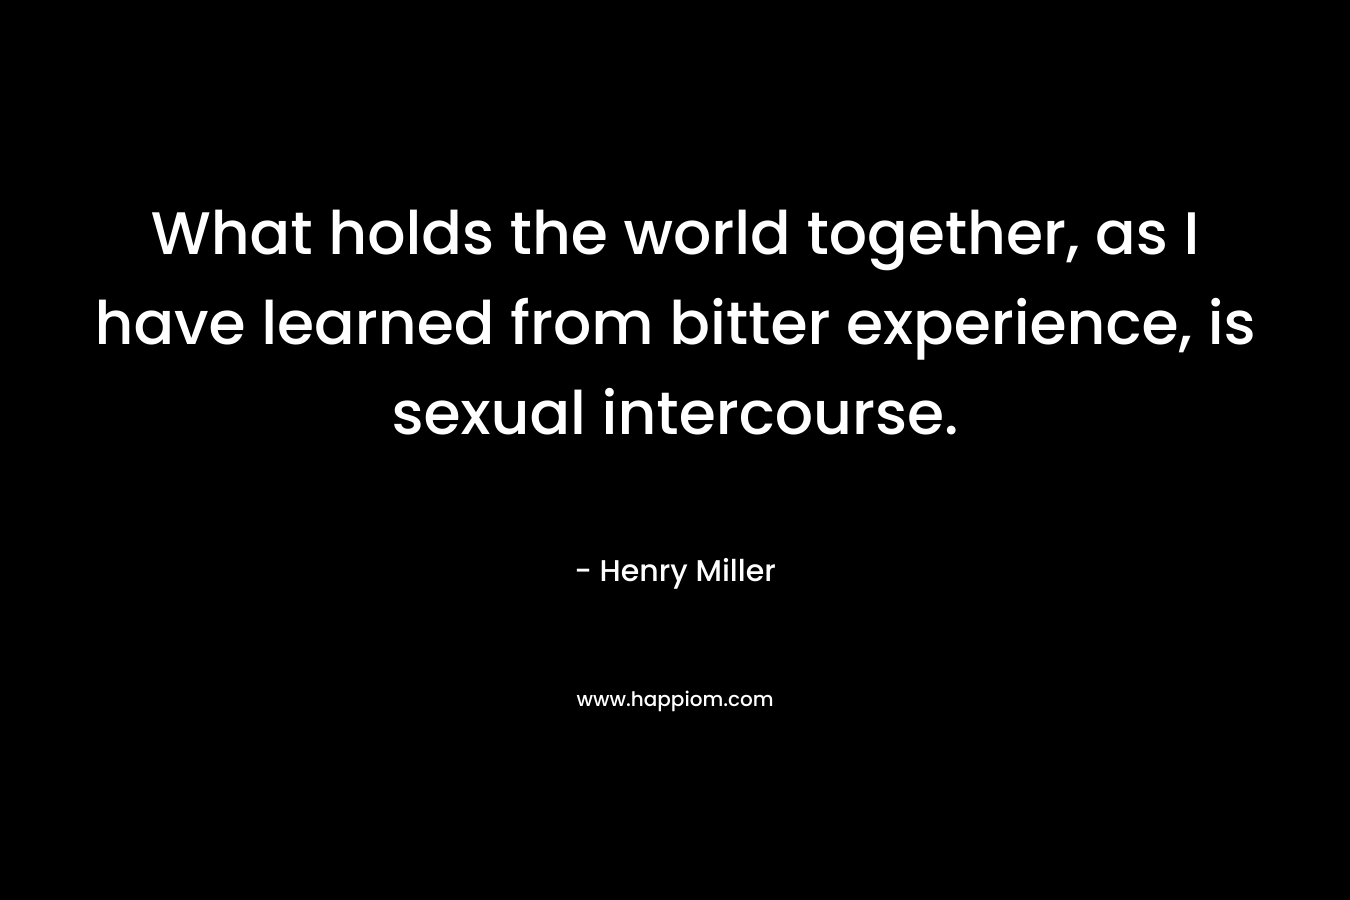 What holds the world together, as I have learned from bitter experience, is sexual intercourse. – Henry Miller